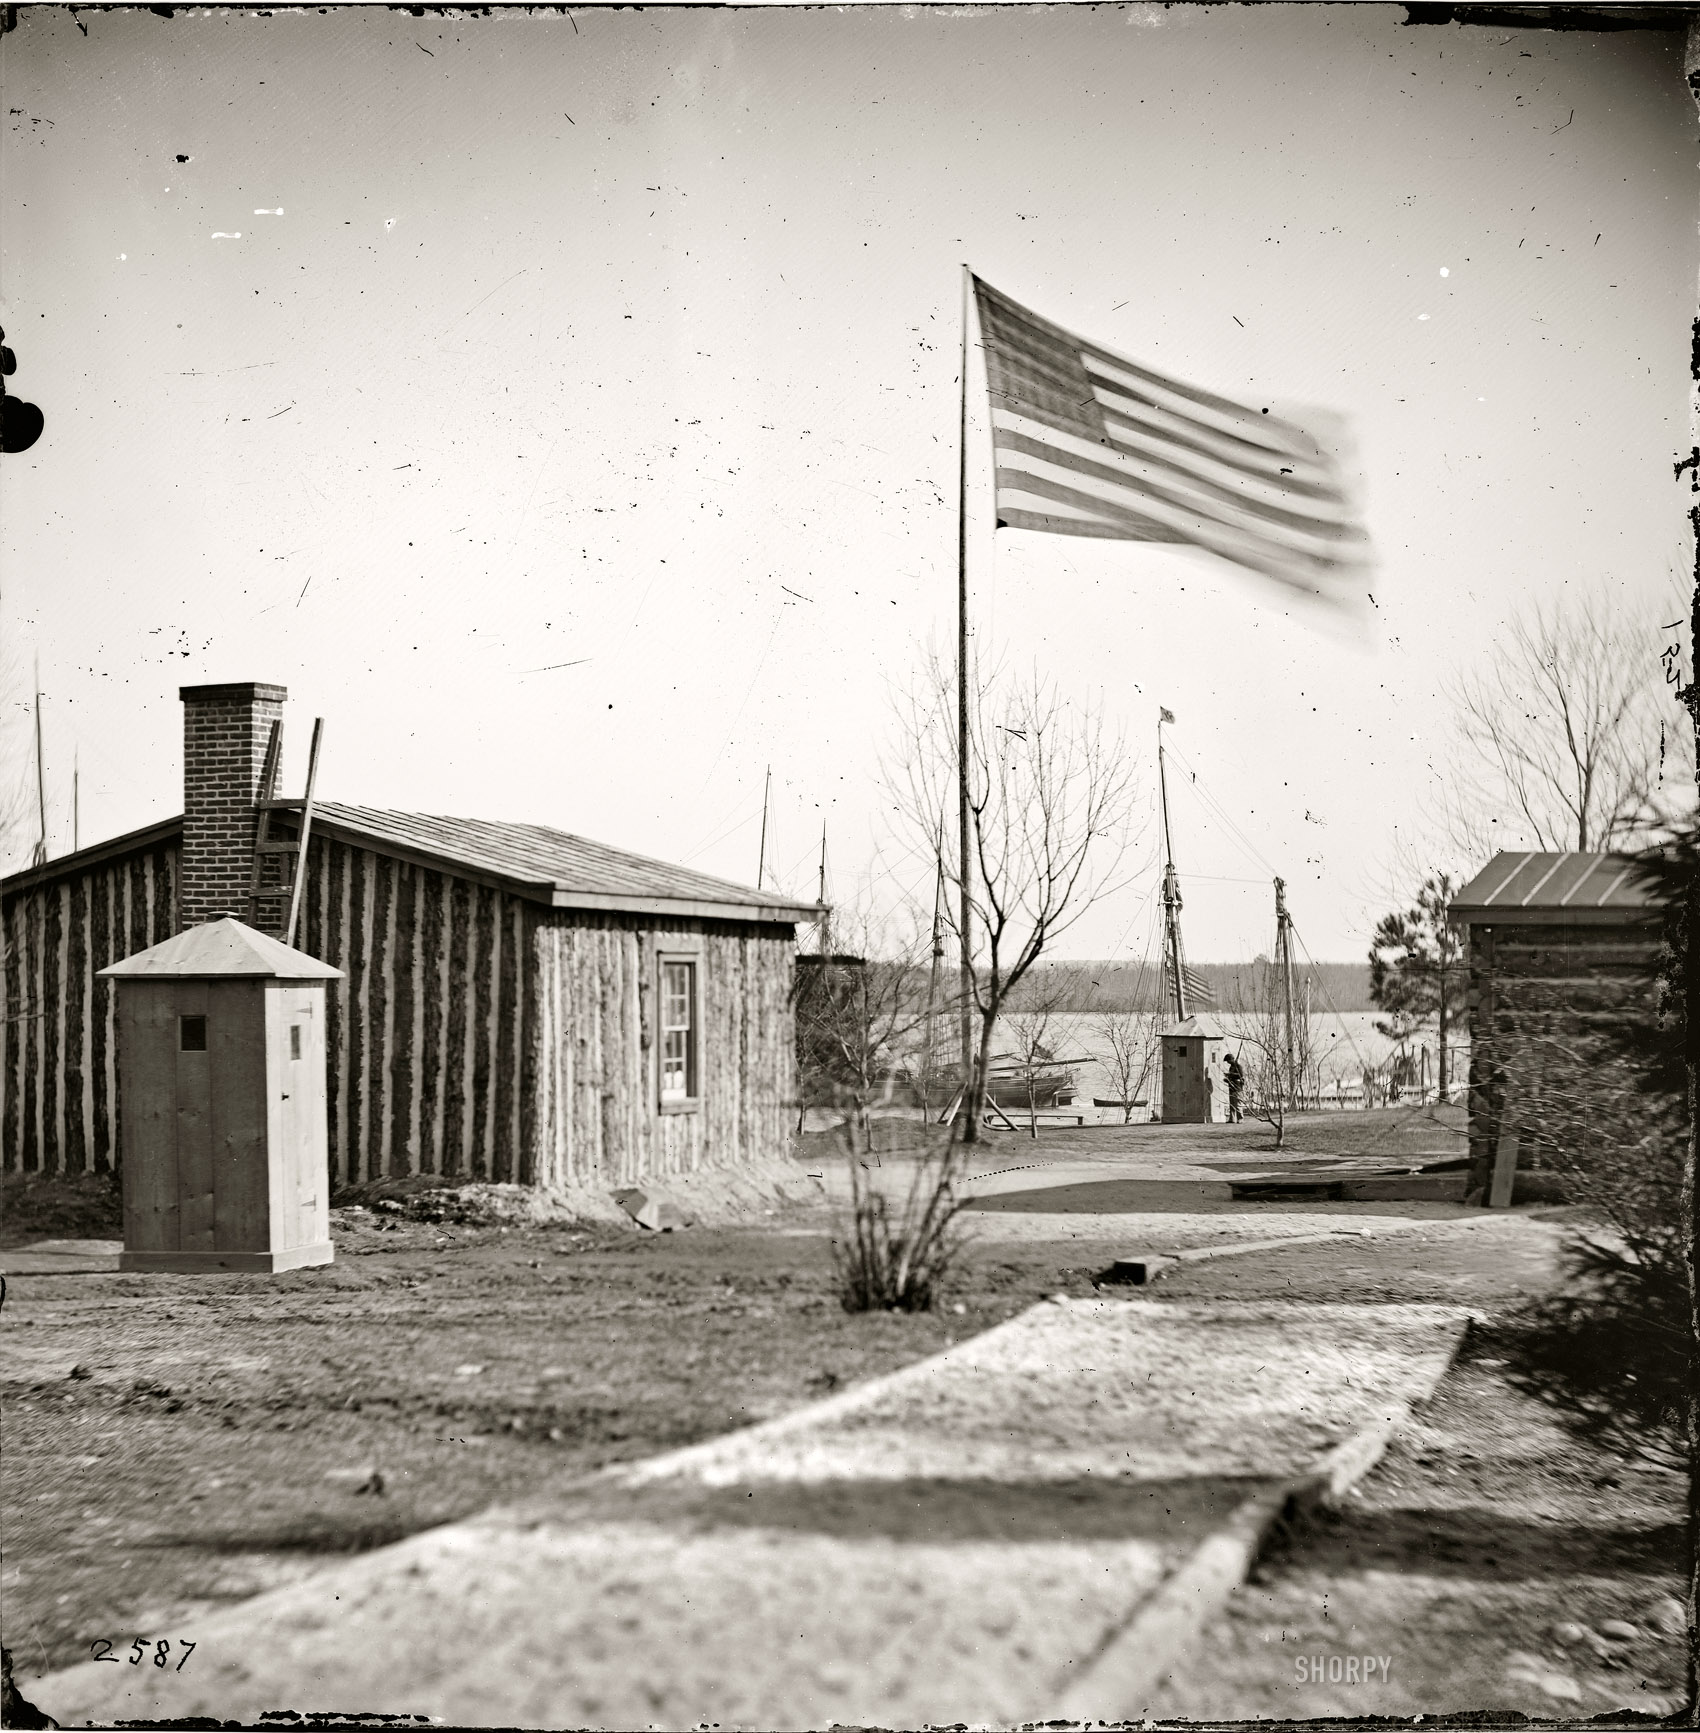 City Point, Virginia, circa 1865. "Rear view of General Grant's headquarters." Photos from the main Eastern theater of war, the siege of Petersburg, June 1864- April 1865. Wet plate glass negative, photographer unknown. View full size.